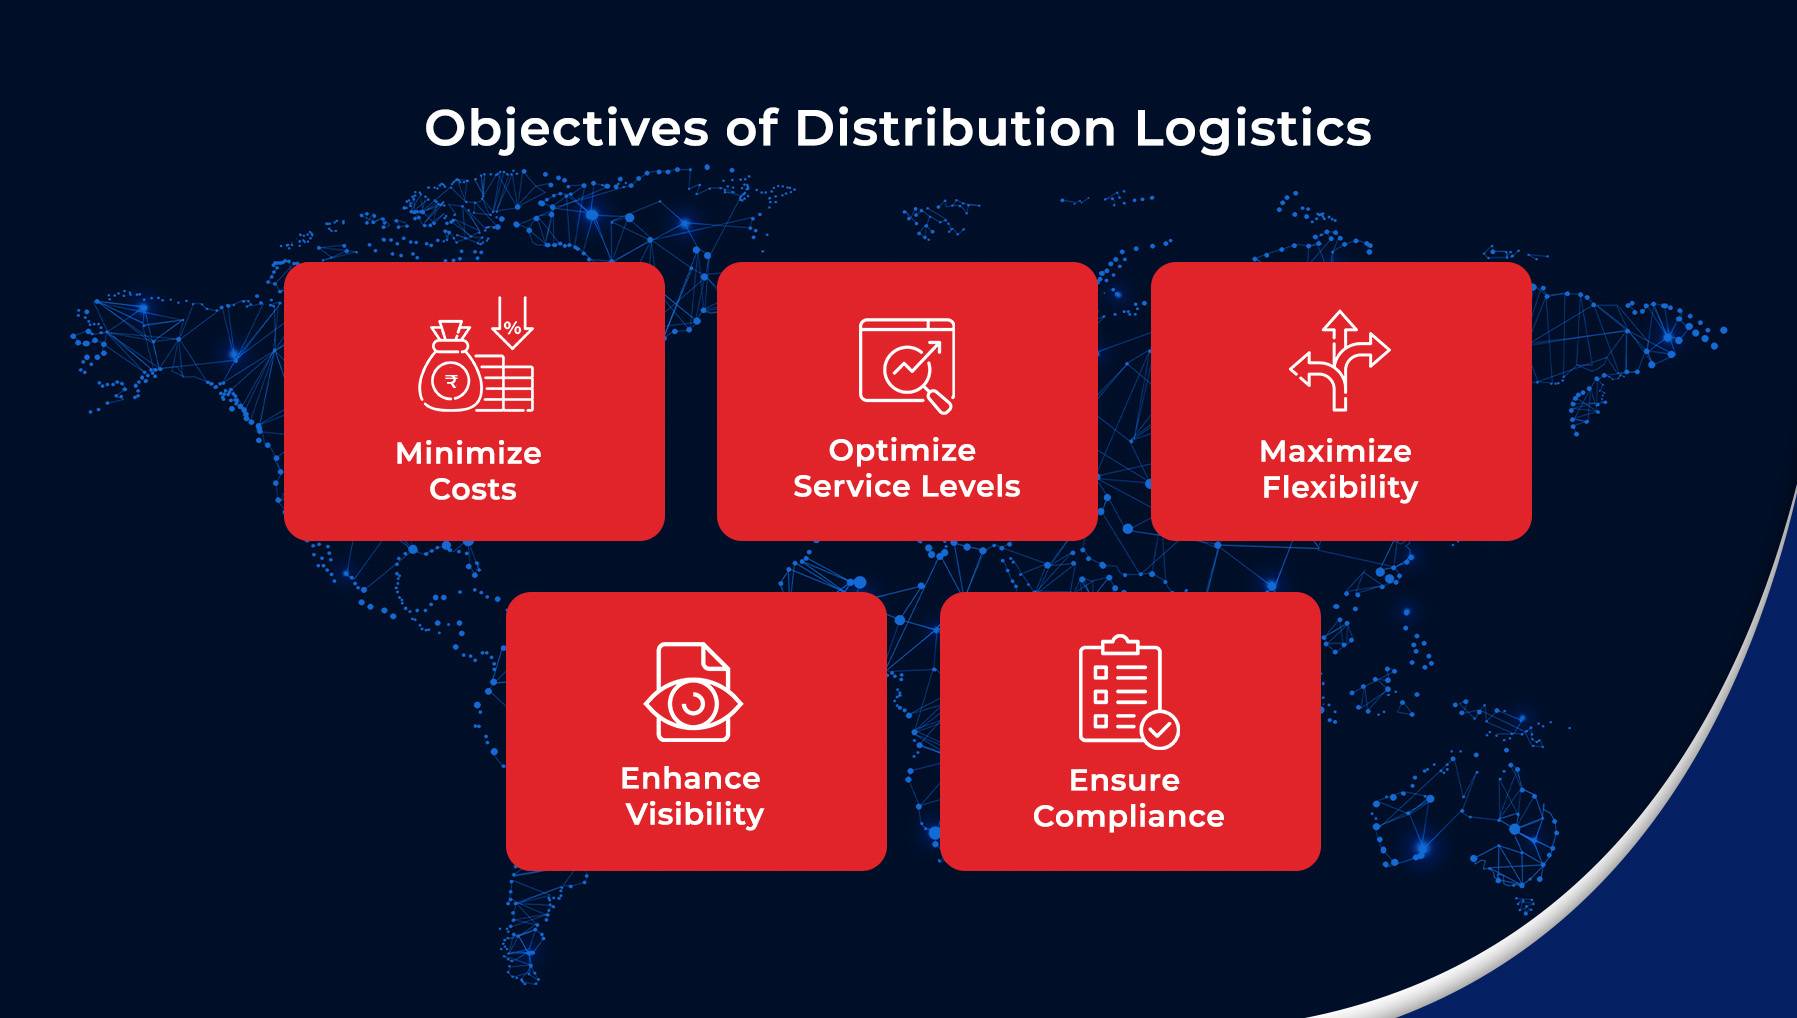 Objectives achieved using Logistics Management Software for Distribution